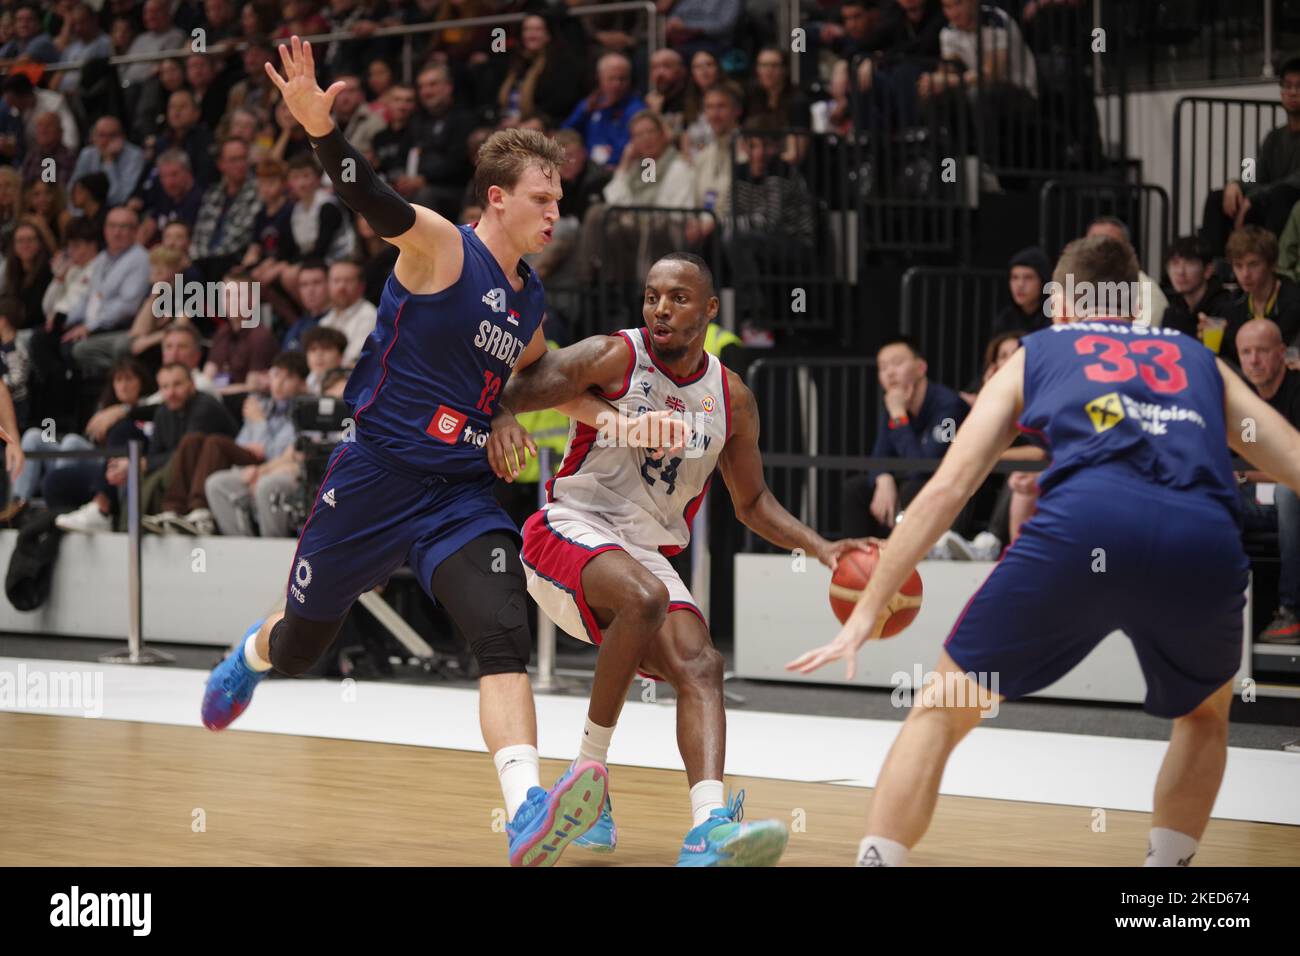 Newcastle upon Tyne, England, 11 November 2022. Aleksa Radanov playing for Serbia and Carl Wheatle playing for Great Britain in the FIBA Basketball World Cup 2023 Qualifiers at the Vertu Motors Arena. Credit: Colin Edwards/Alamy Live News Stock Photo